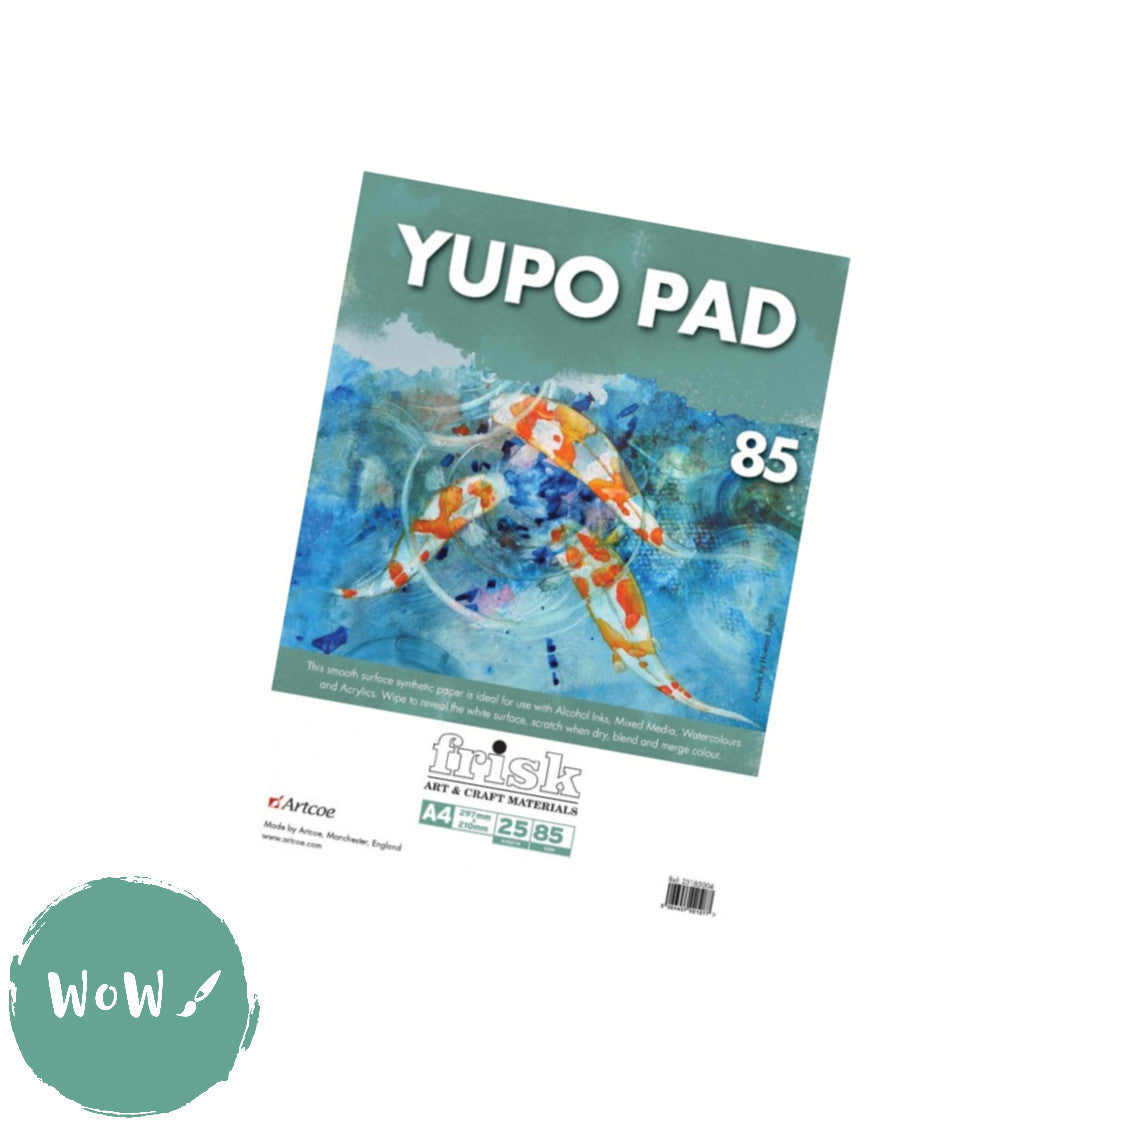  Ursus Yupo Paper, 85 g, DIN A5, 25 Sheets, Synthetic, Smooth  Surface, Tear and Waterproof, UV Lightfast, Extremely Durable, 100%  Recyclable, Versatile Use, White : Arts, Crafts & Sewing